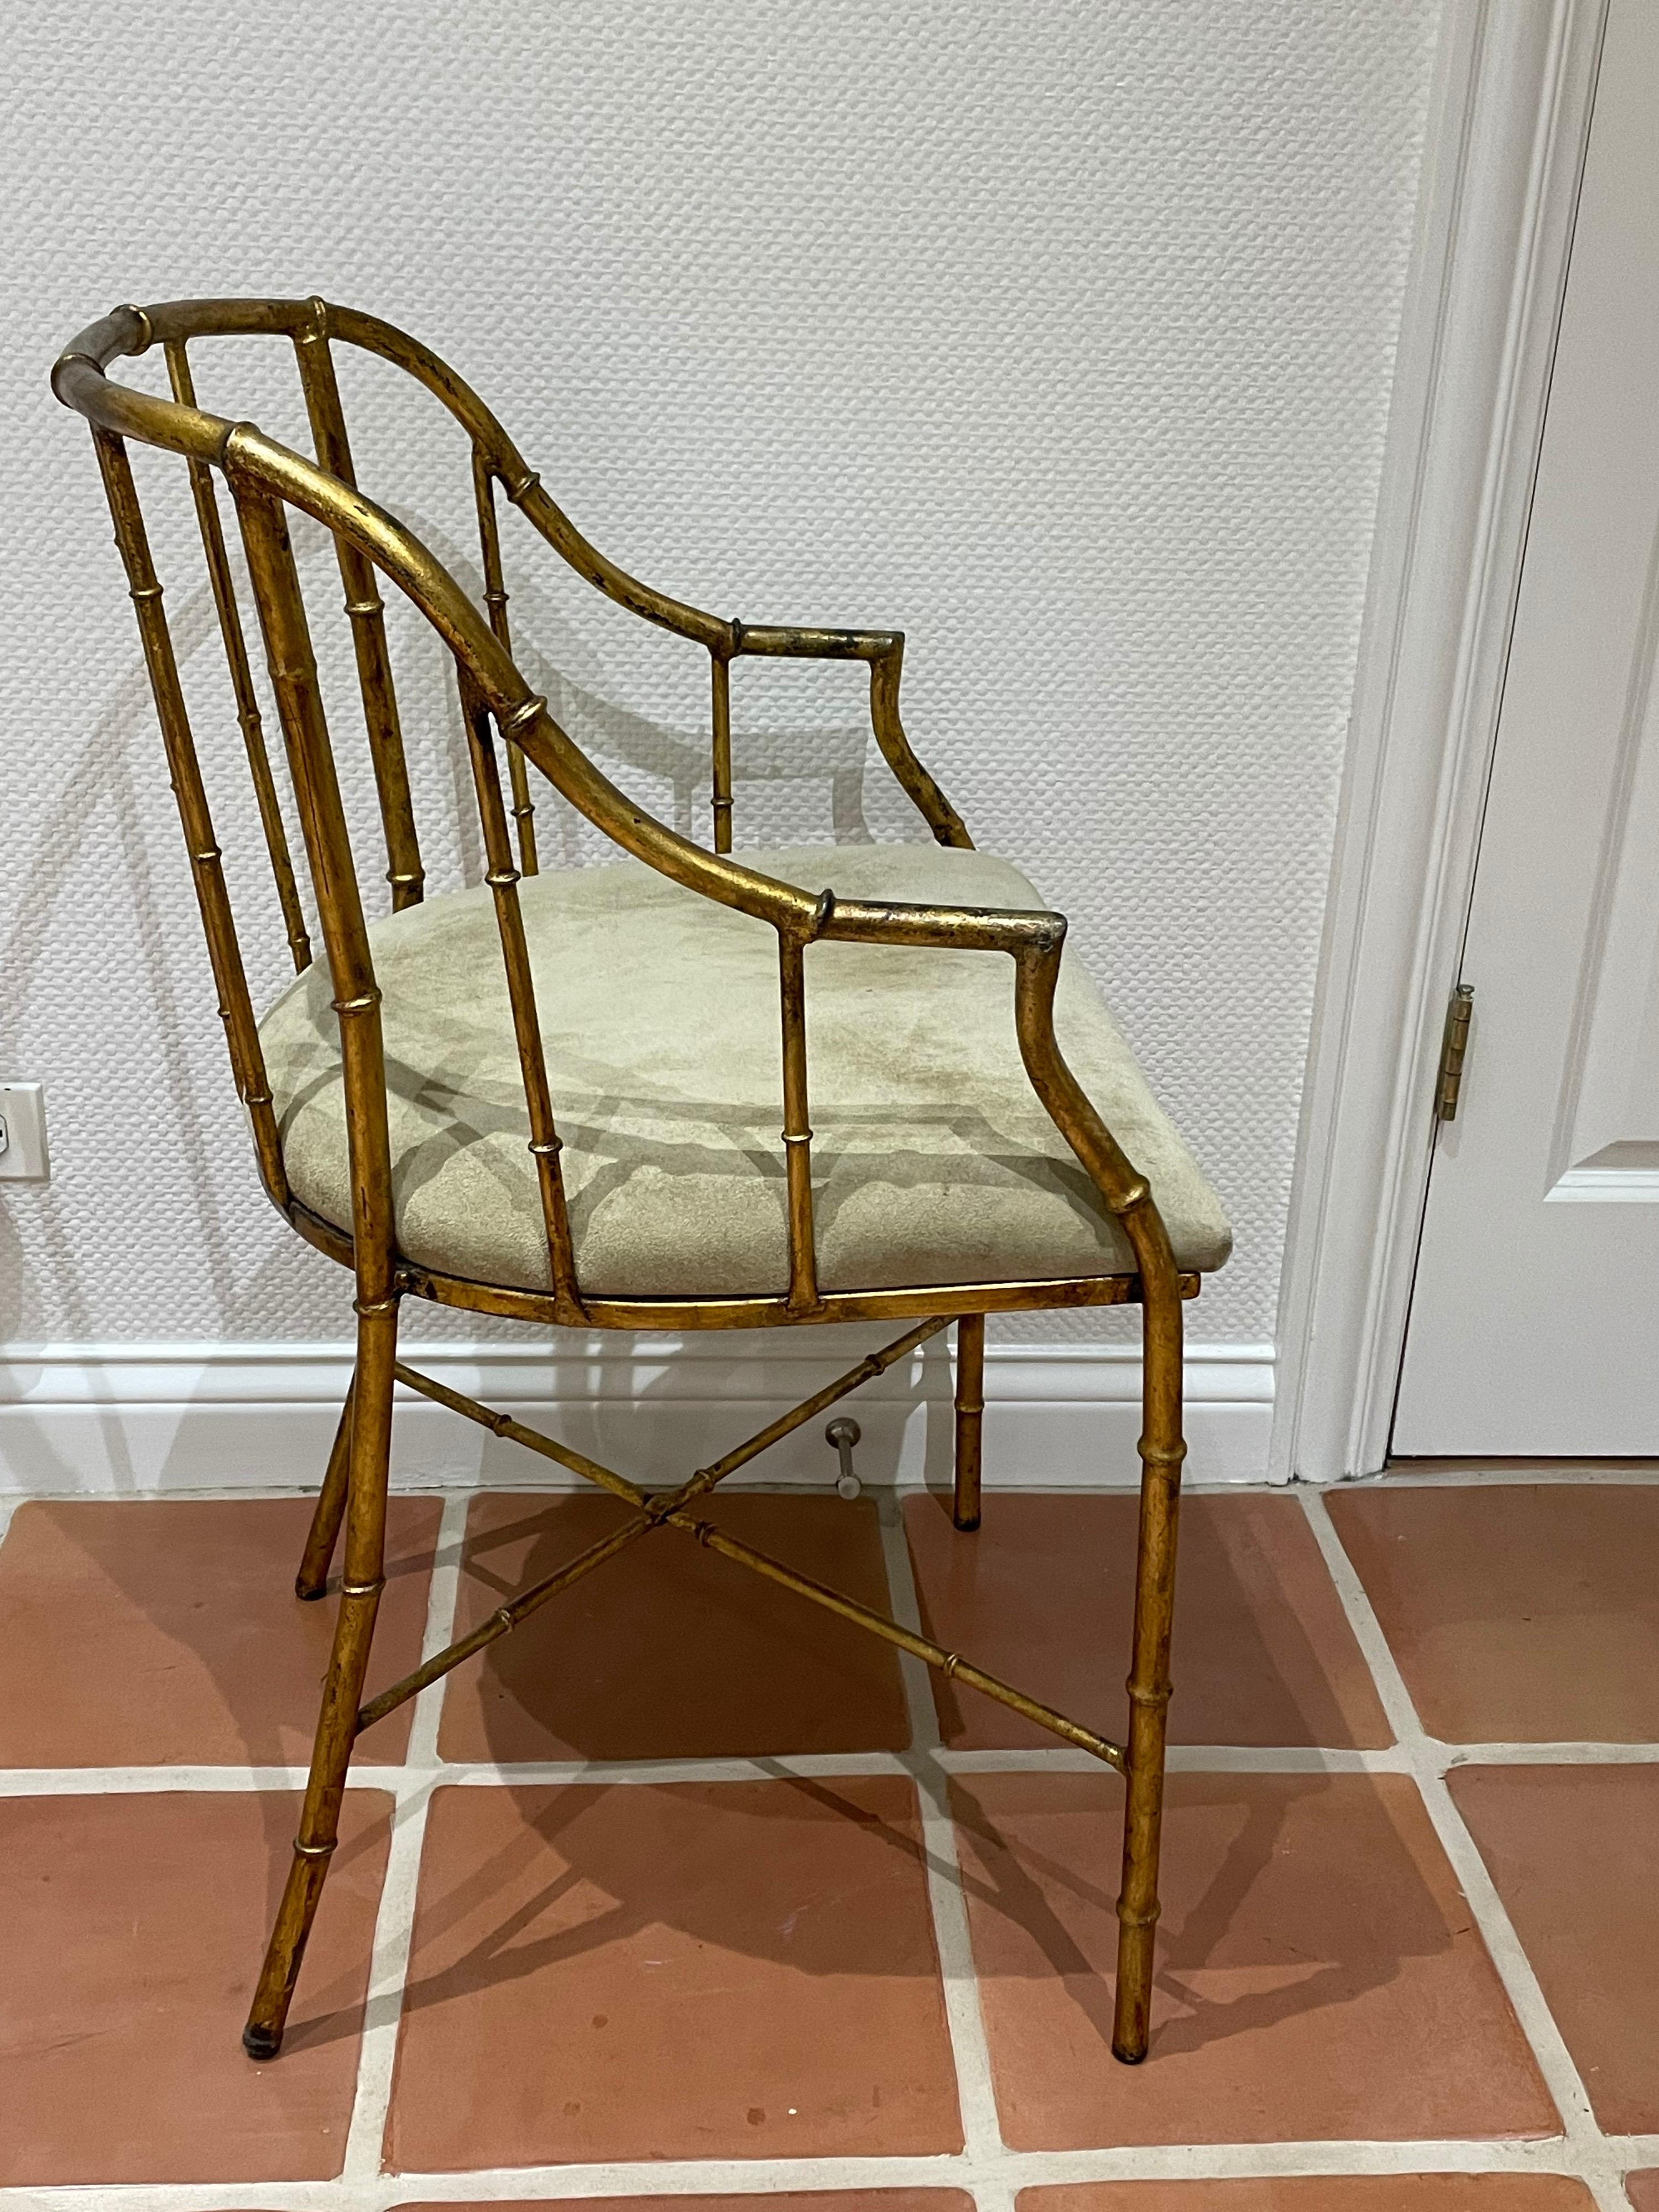 This is a vintage gilt bamboo and suede occasional chair from Spain It’s in great condition and would be a nice desk chair probably
From 50-60s.